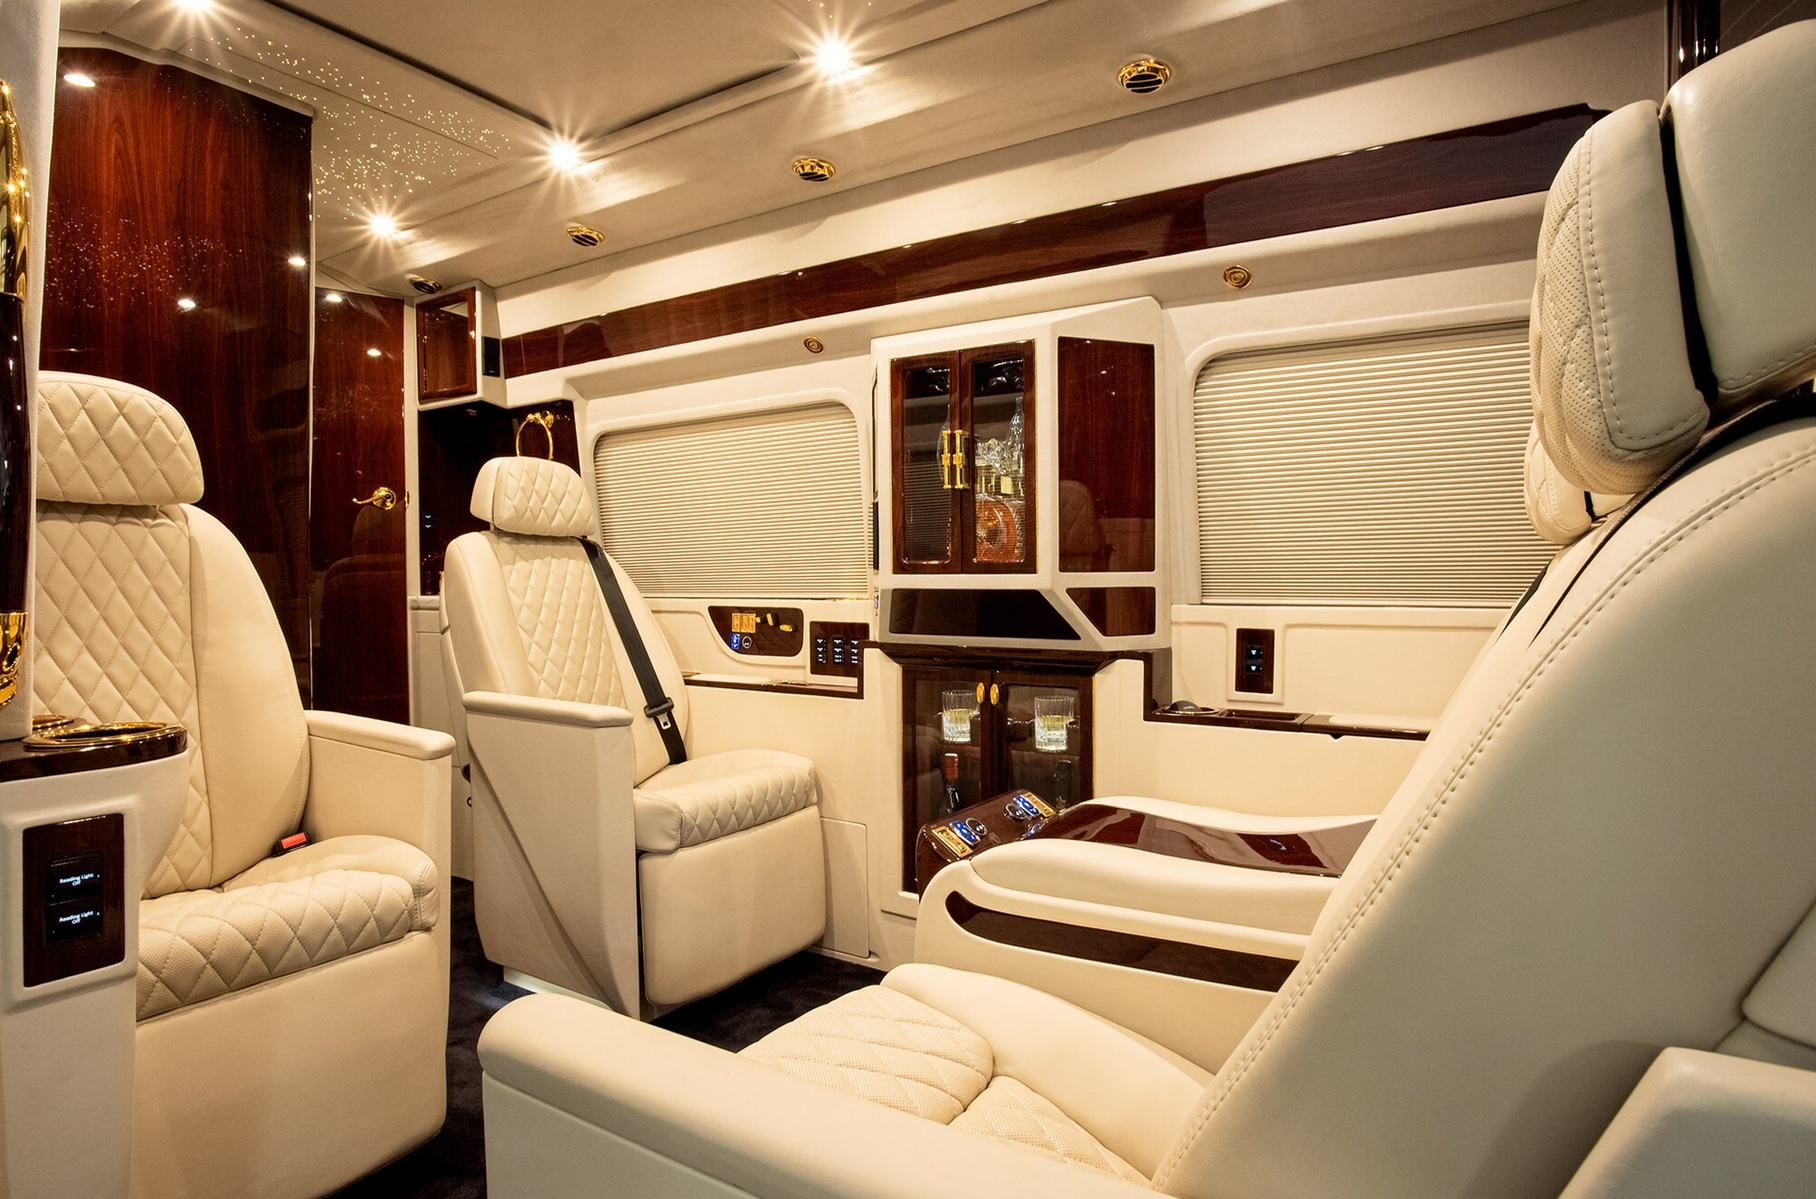 Van Mercedes-Benz Sprinter turned into a luxury office on wheels with a toilet